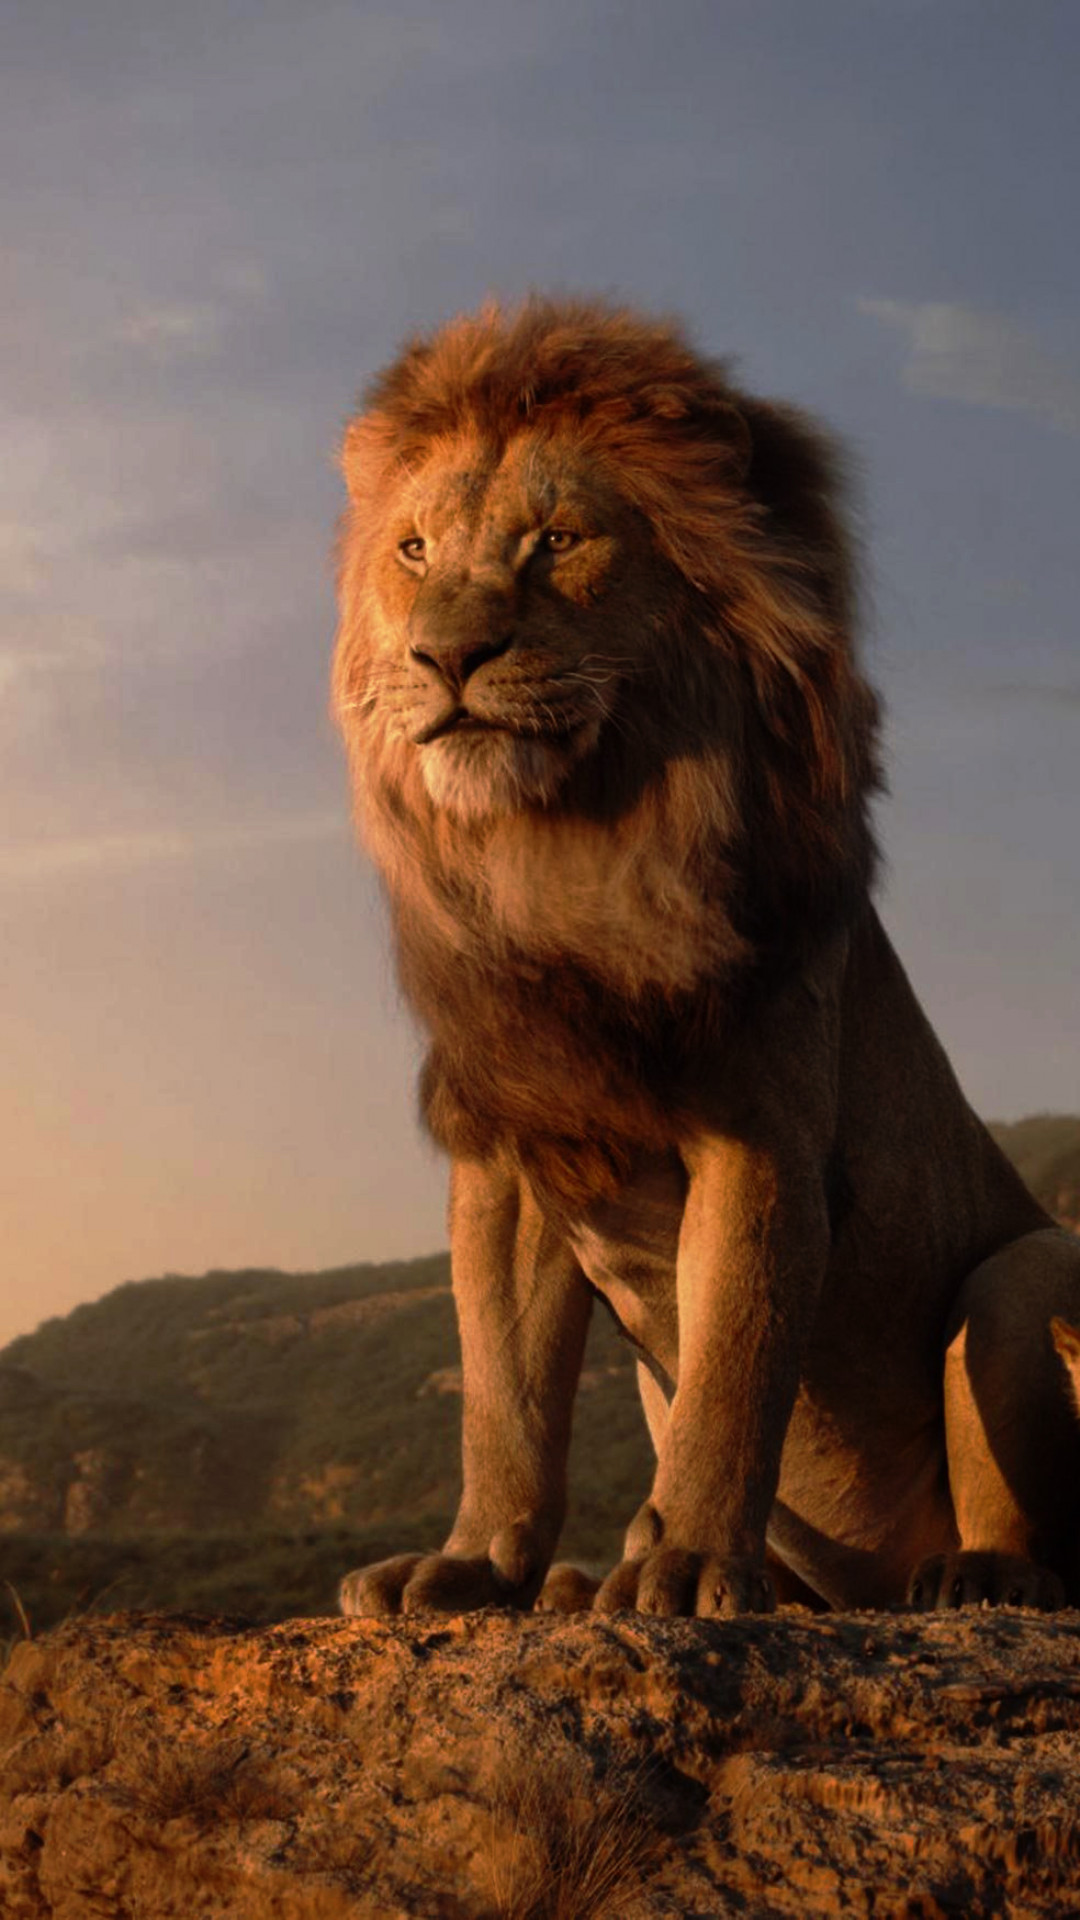 Wallpaper The Lion King, HD, Movies #21813